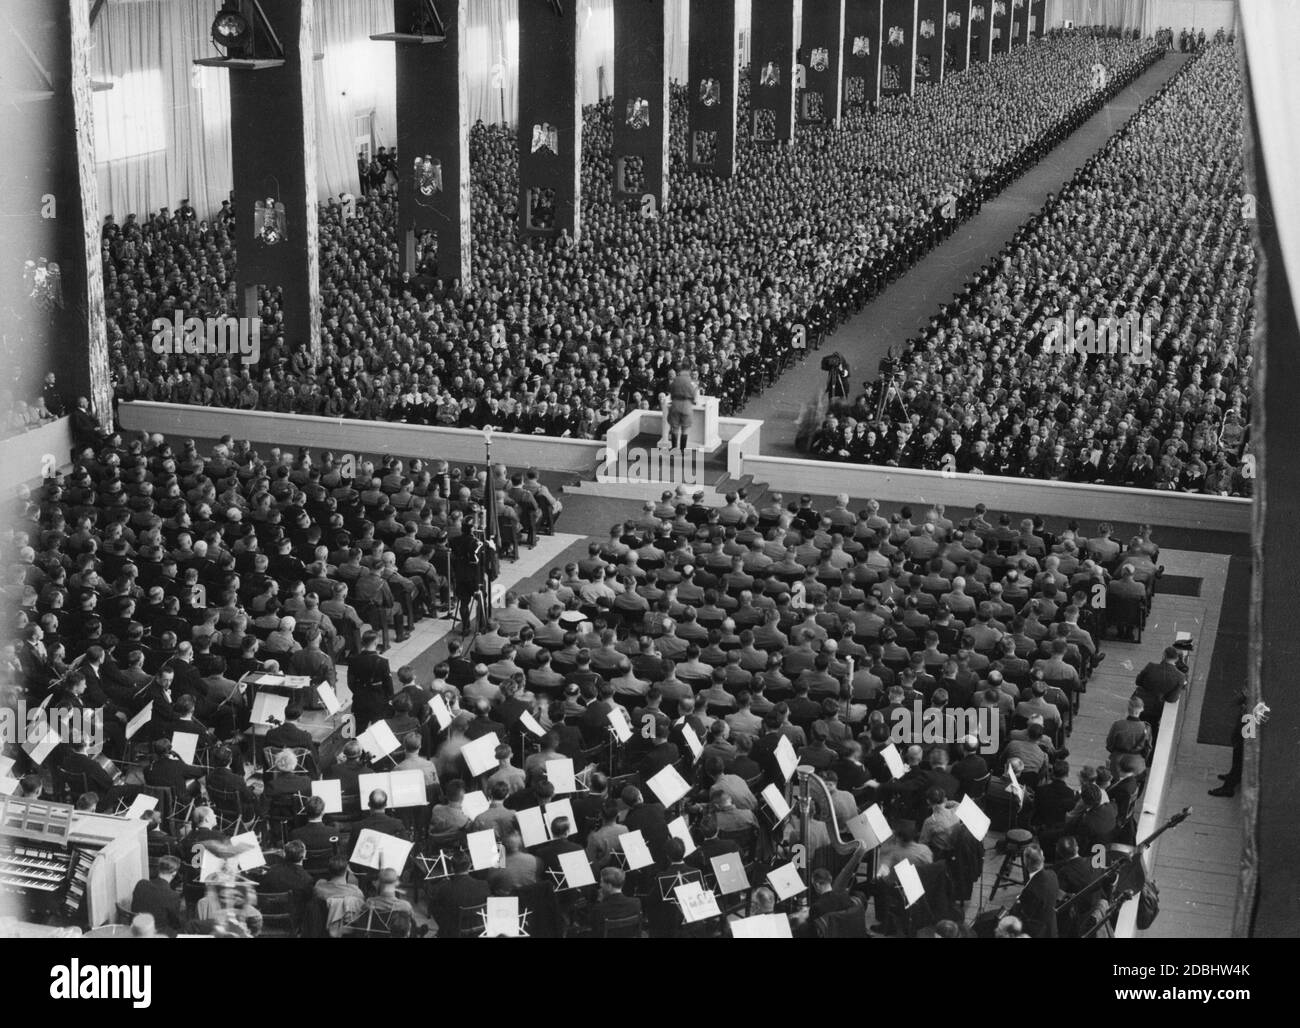 Rudolf Hess gives a speech at the opening of the party congress in Nuremberg's Luitpoldhalle, filmed by a cameraman. In the foreground is a music orchestra. Stock Photo